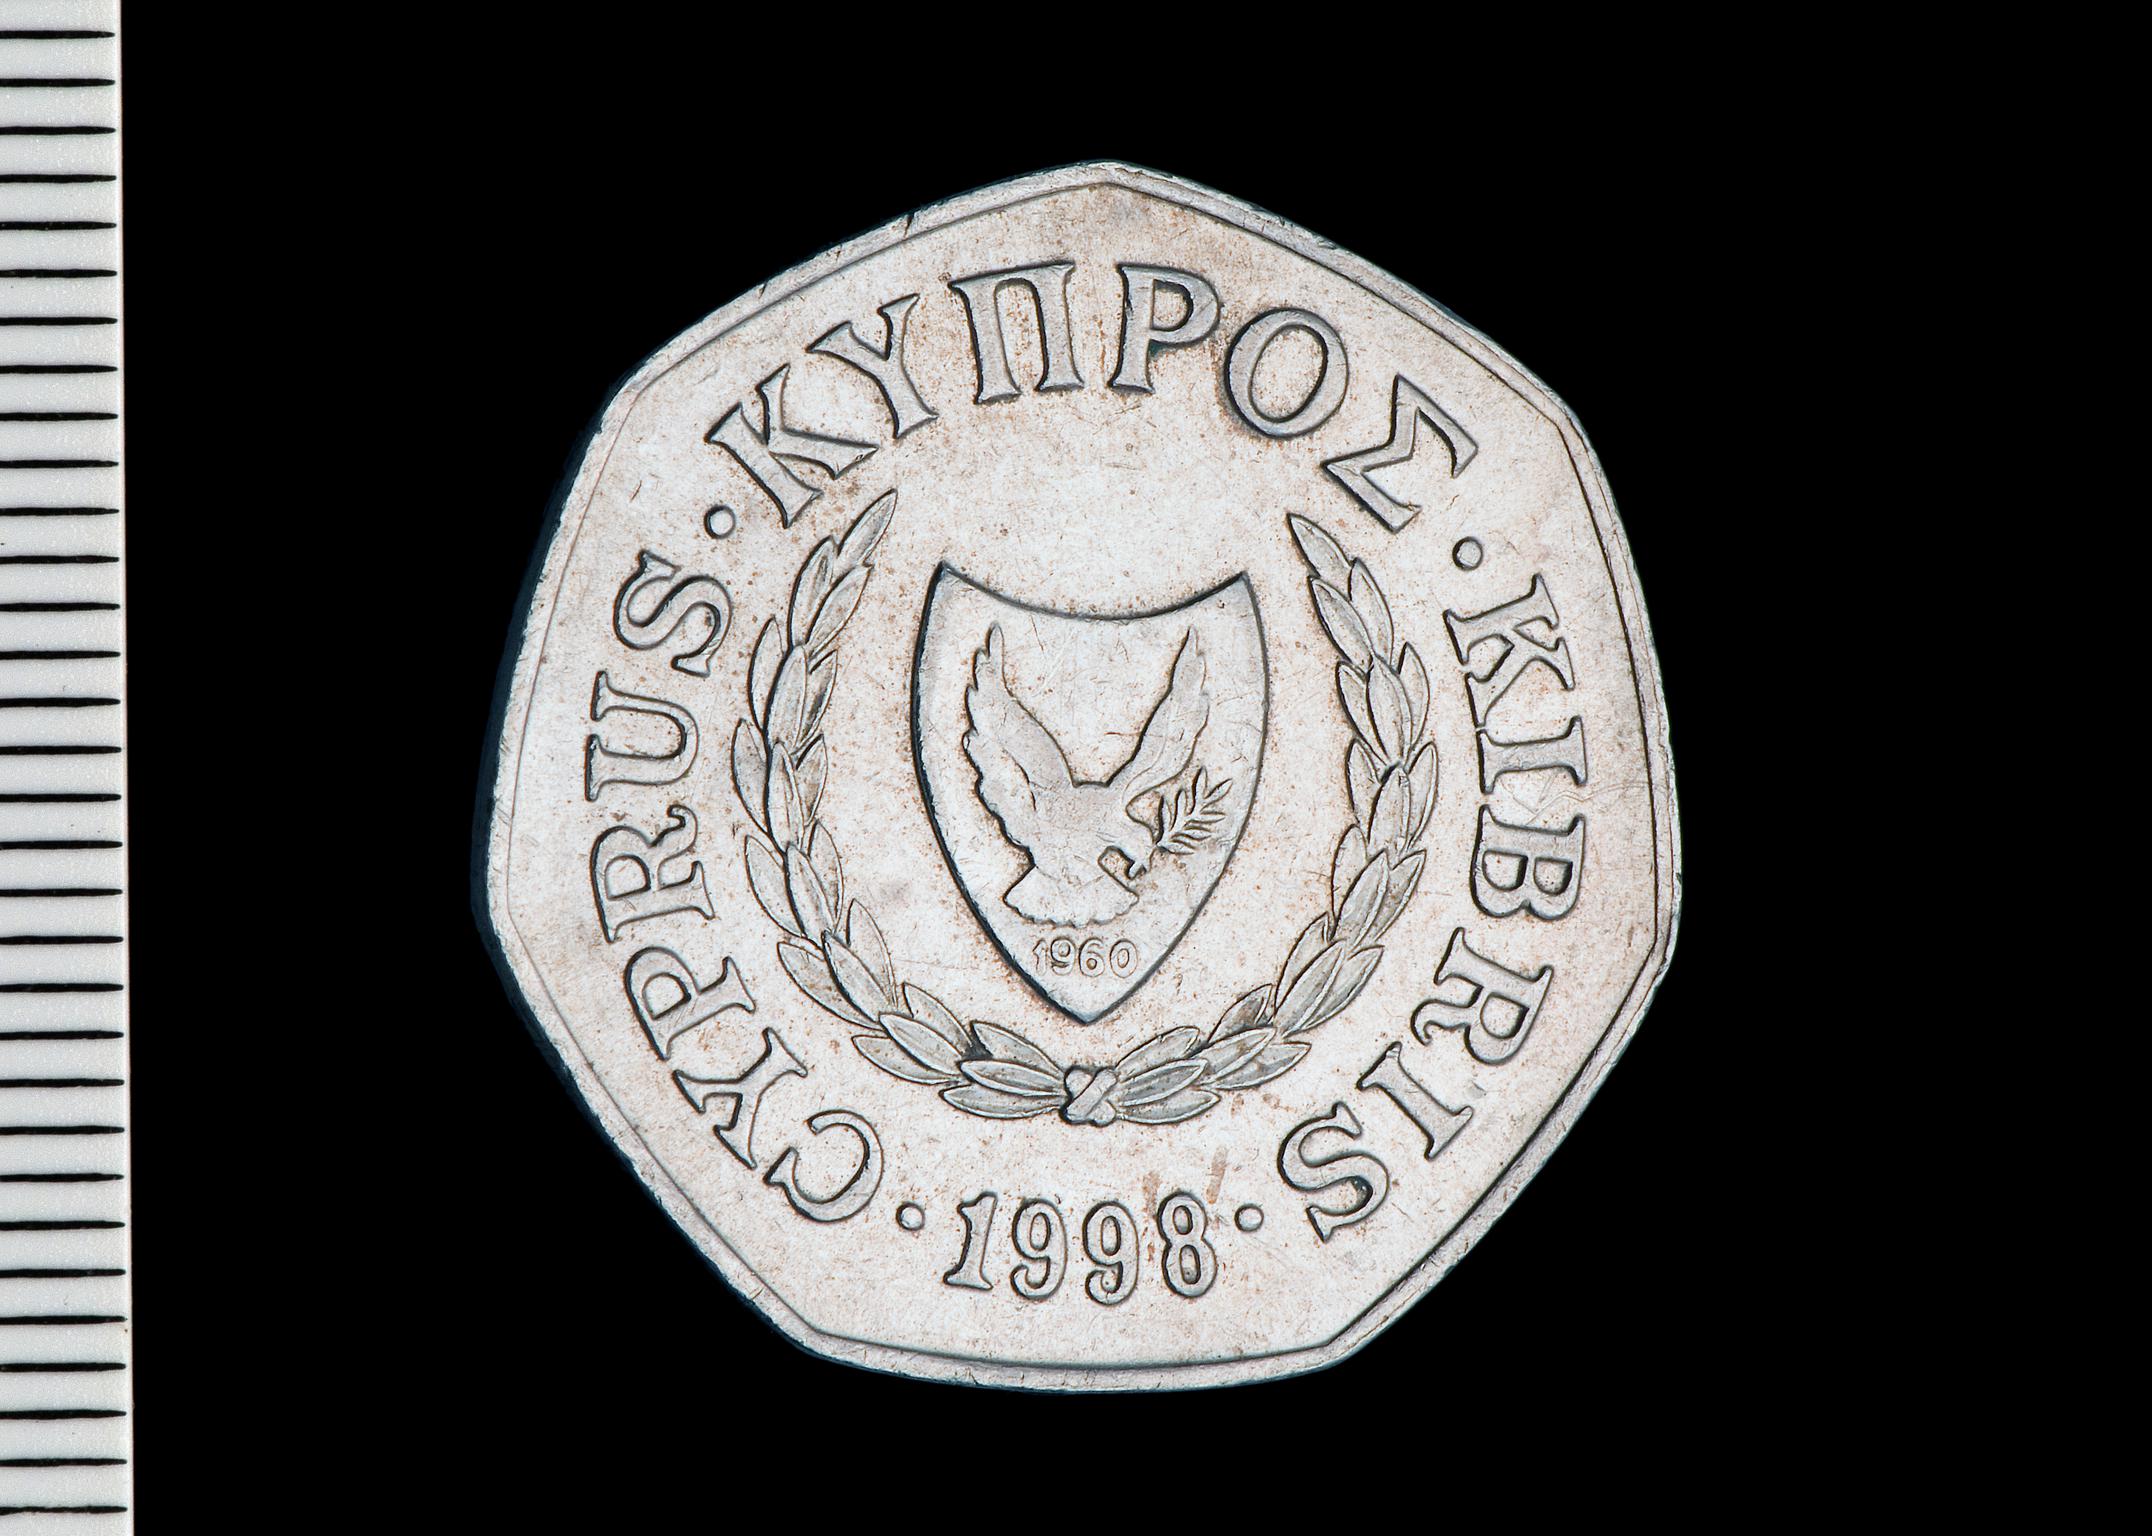 Cyprus (Republic) fifty cents